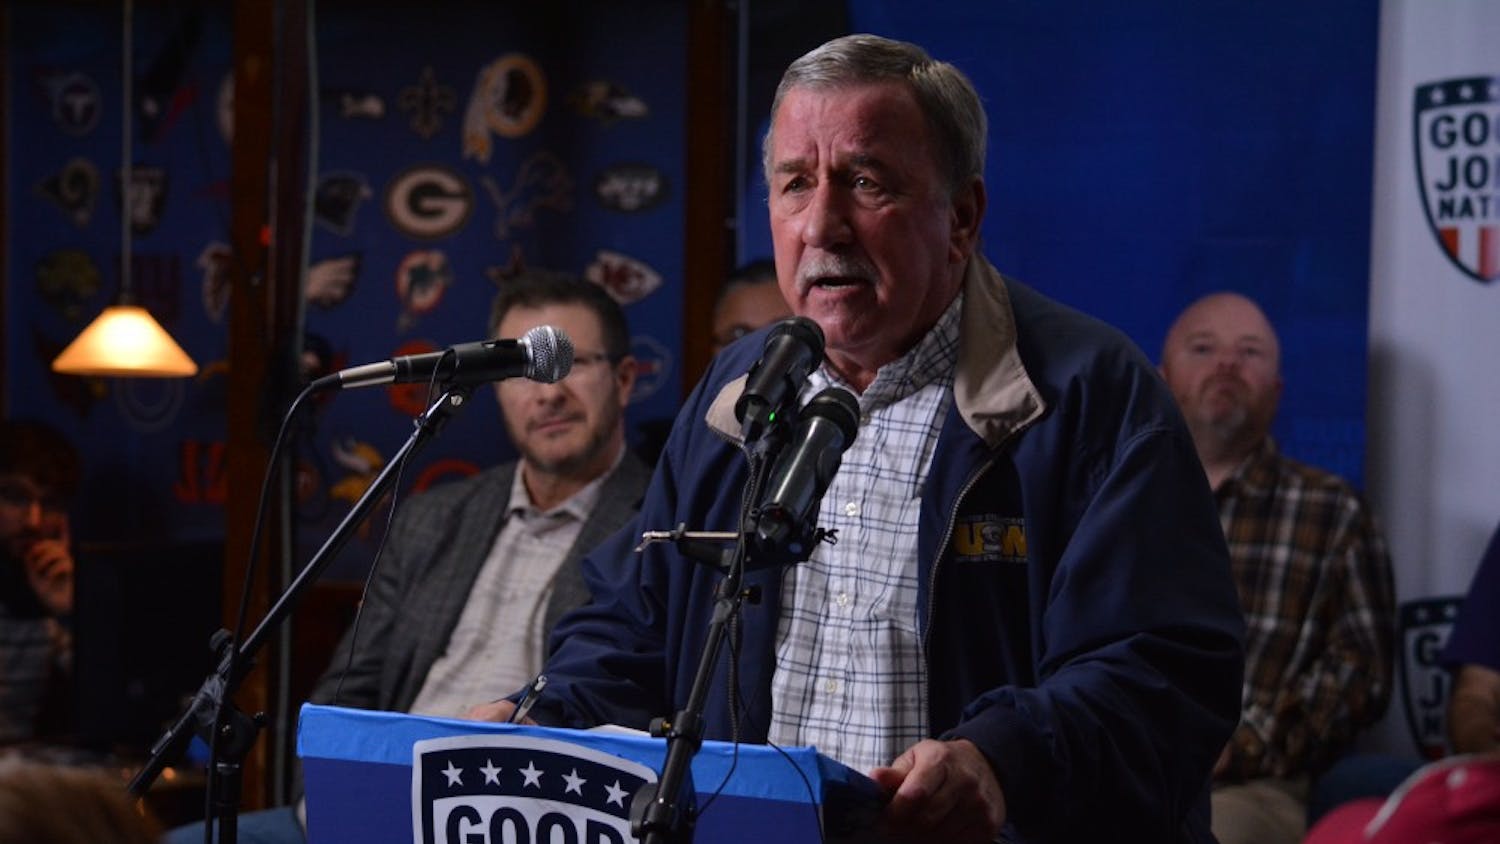 Former Indianapolis United Steelworkers President Chuck Jones spoke out against Carrier layoffs at a press conference in Sully's Bar and Grill on Wednesday night. Jones said the selfishness of the Trump family and large corporations are contributing to the culture of job outsourcing.